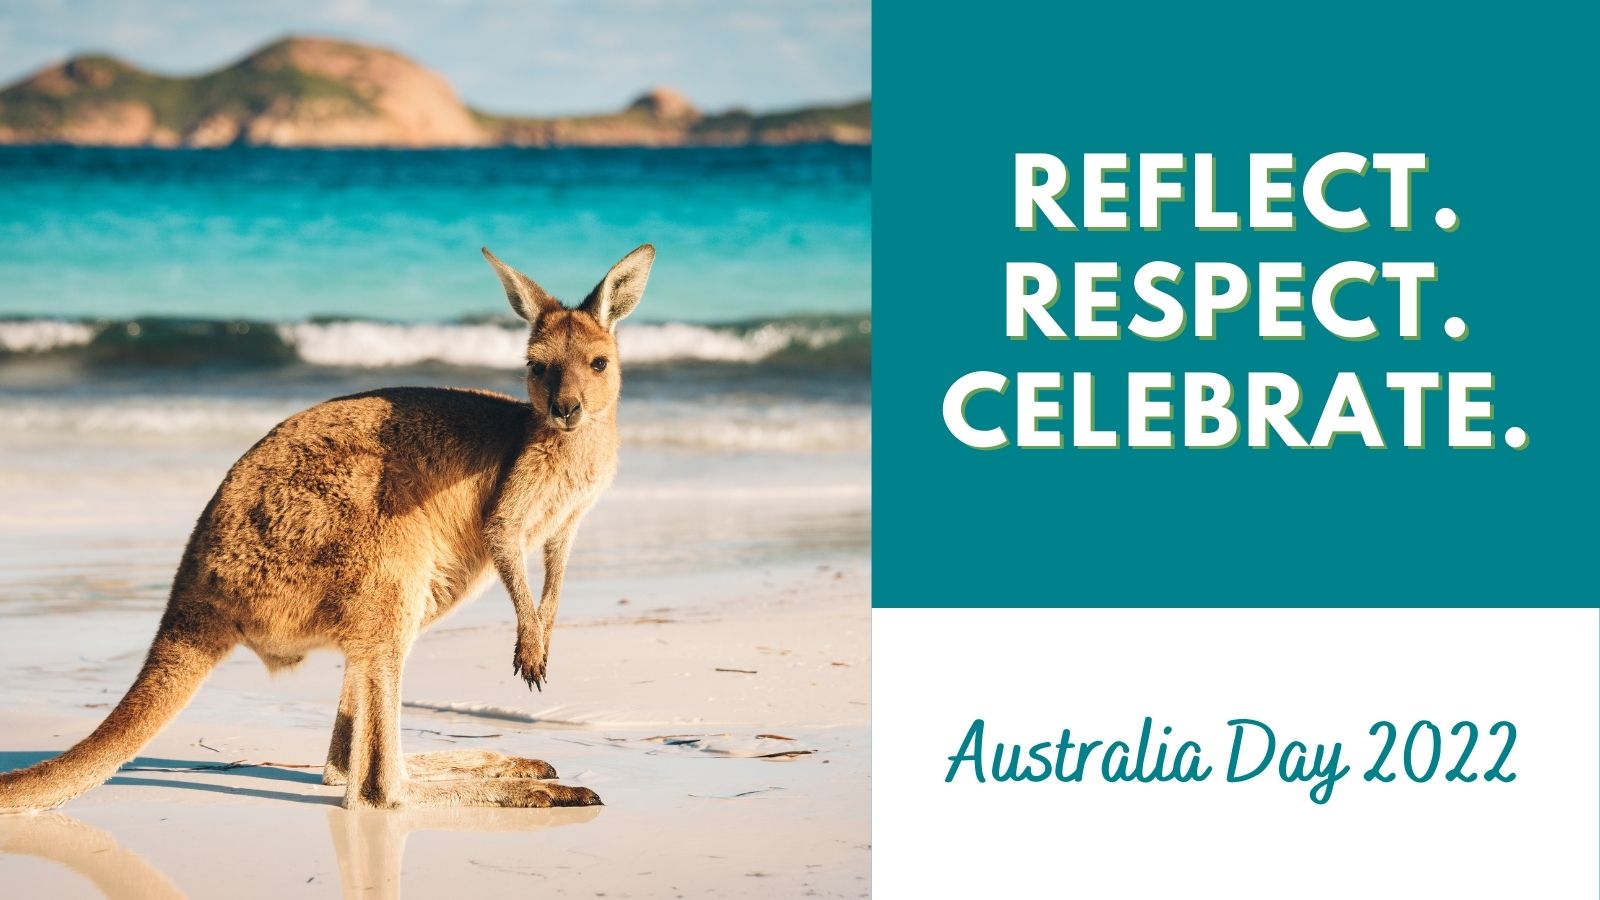 A kangaroo on a beach, with a banner \\\\\\\\\\\\\\\\'Reflect. Respect. Celebrate"